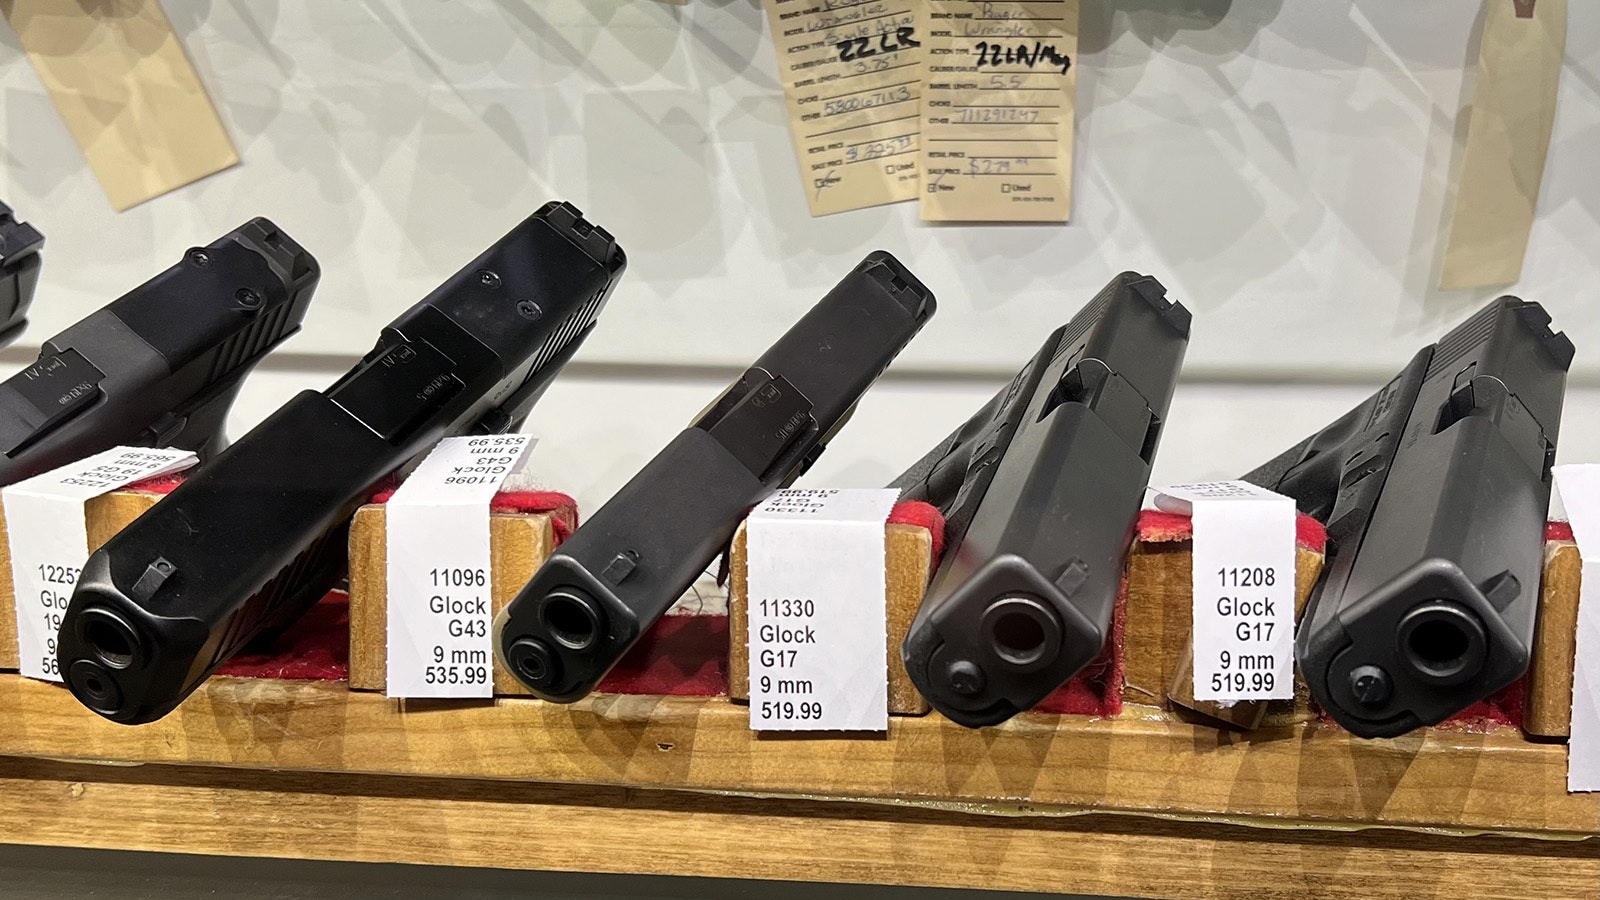 Glock Pistols, like these at the West Laramie Fly Store in Laramie, among the best-selling firearms in Wyoming.